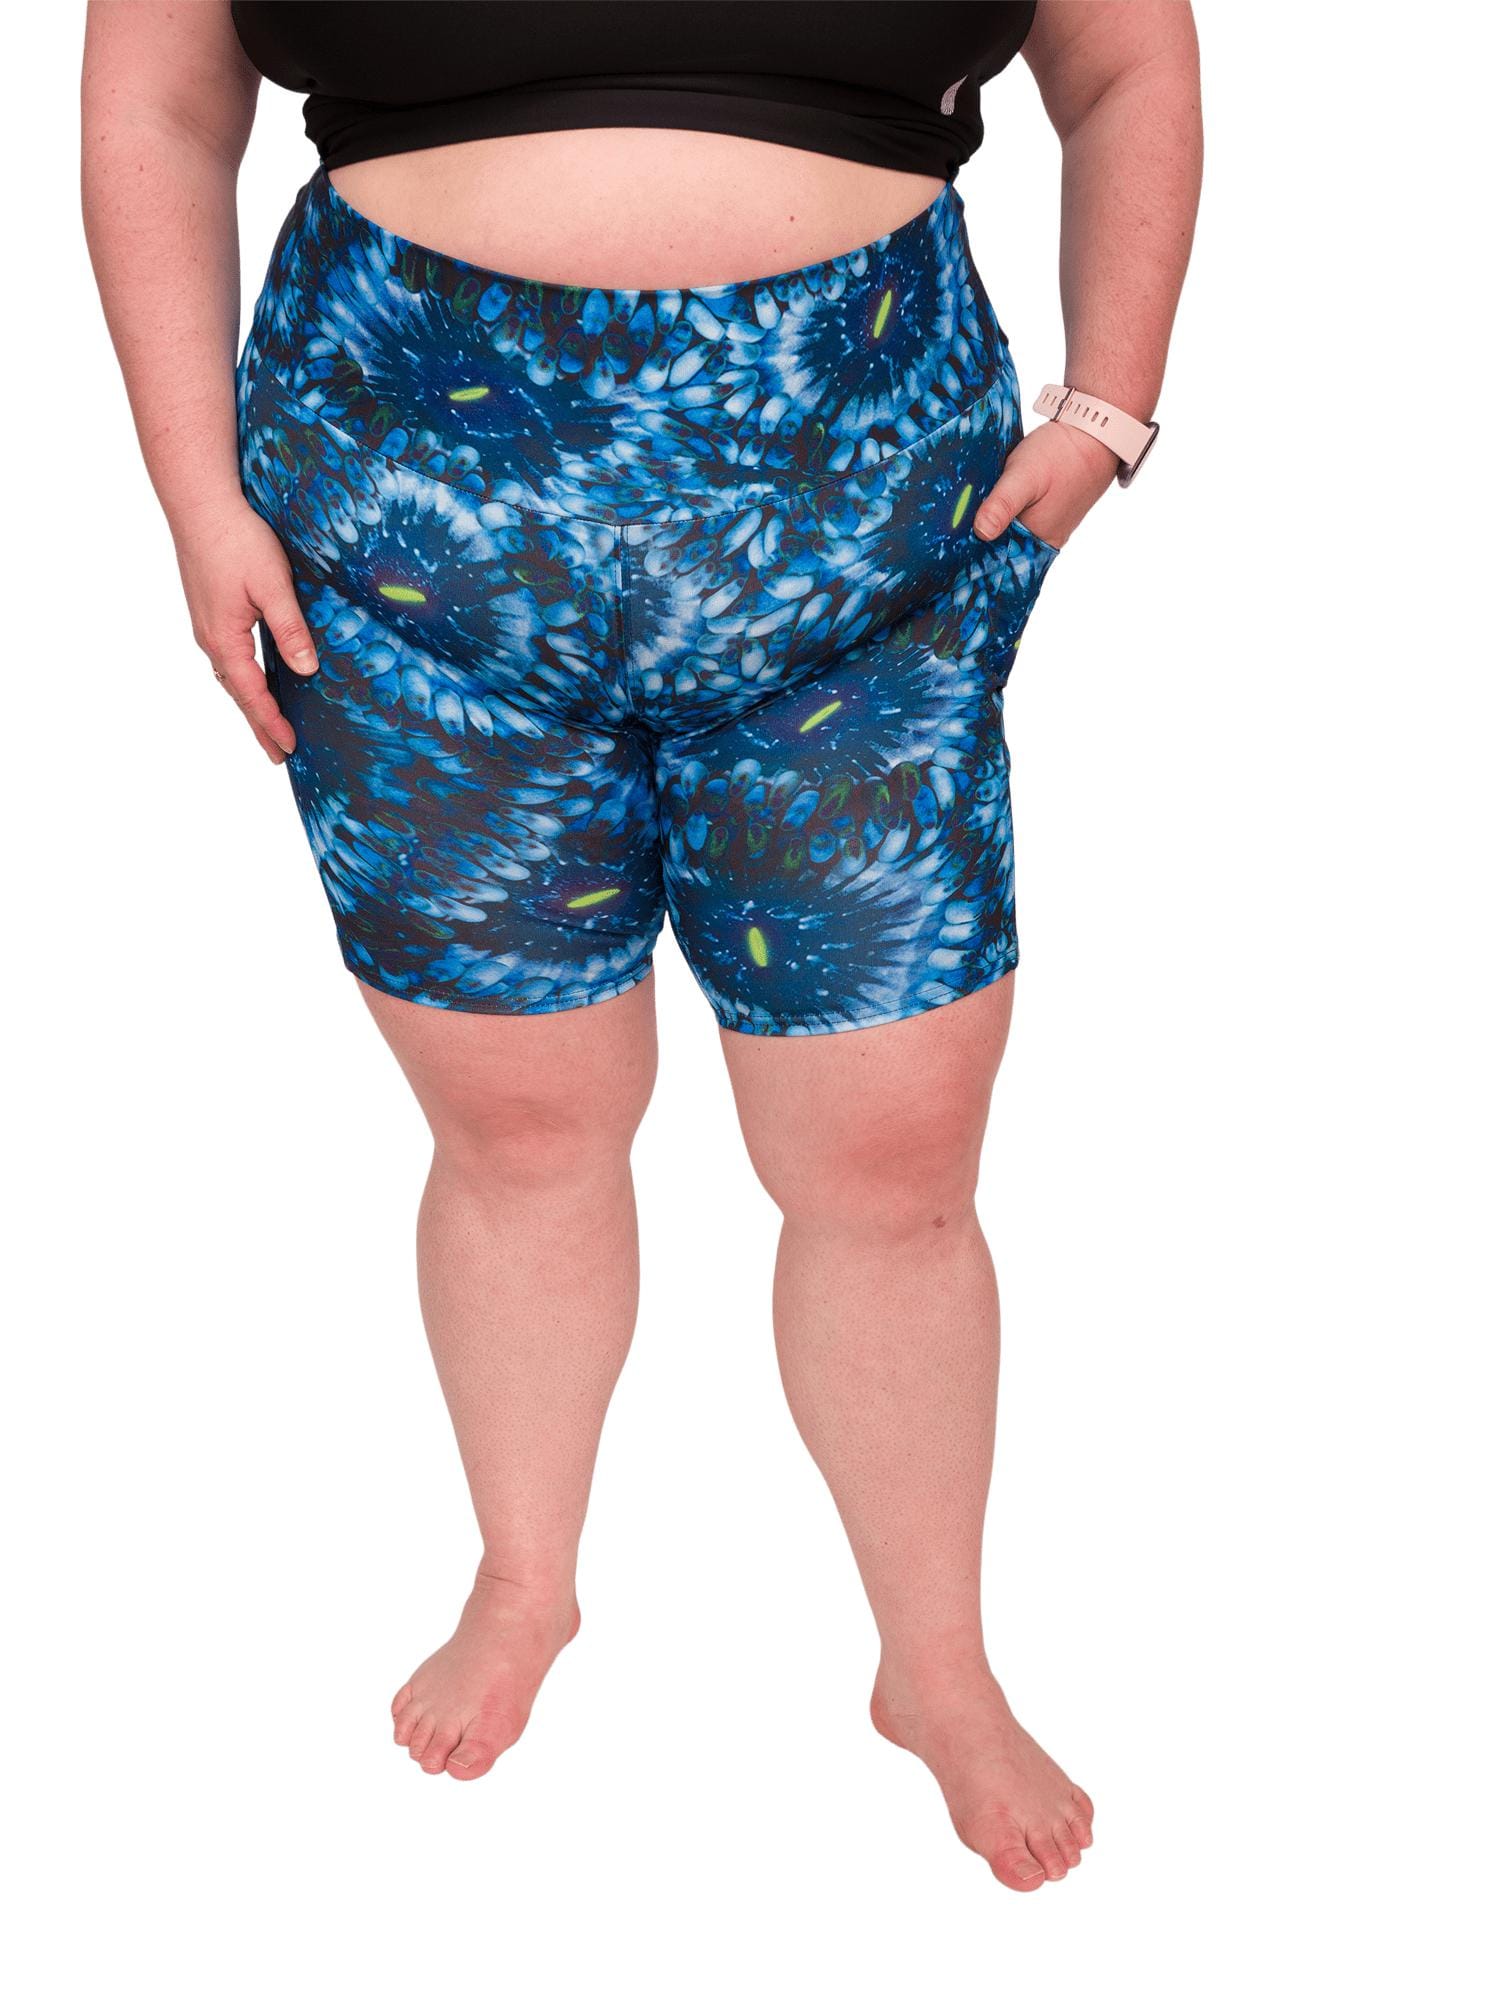 Model: Chelsea is a marine conservationist who believes that science is for everybody… and every BODY! She is 5'2", 230 lbs, 40DD and is wearing 3XL shorts.